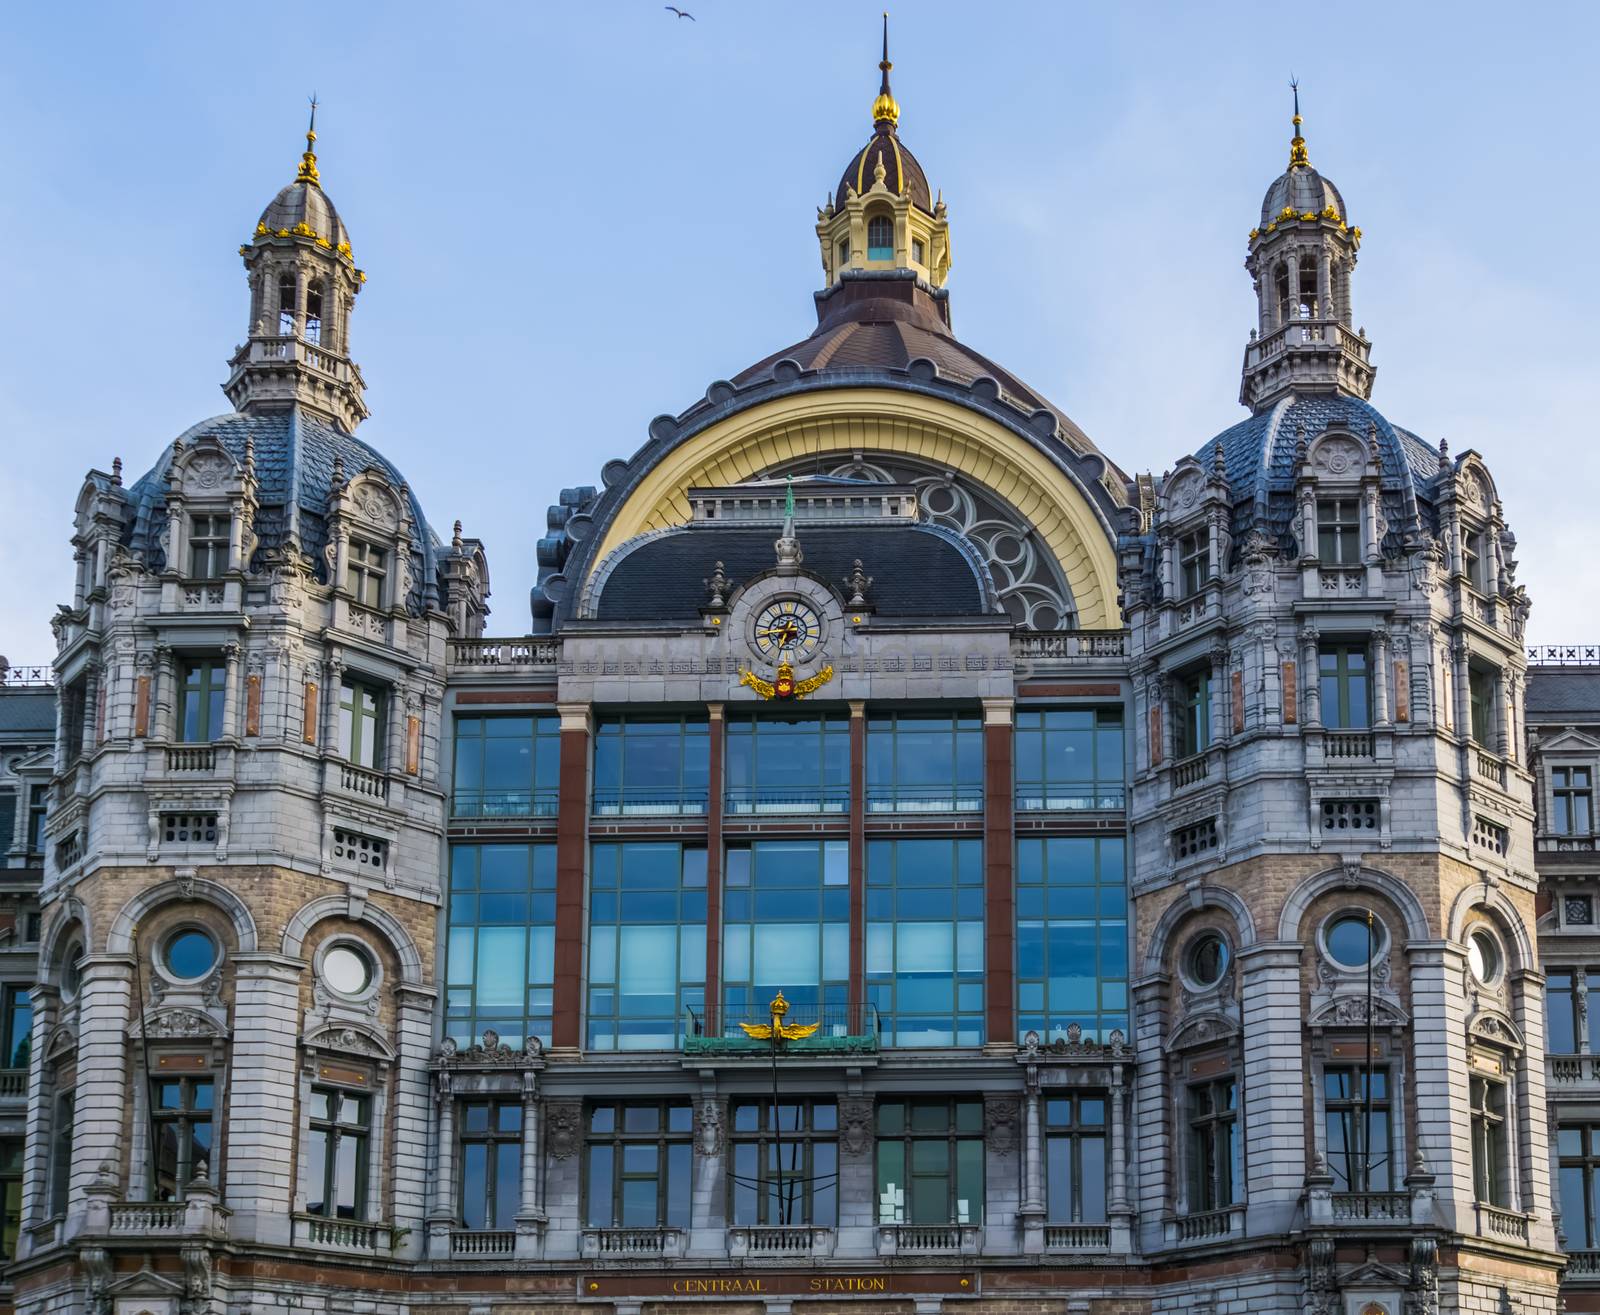 the central station building of Antwerp city, historical and classic Belgian architecture, Antwerpen, Belgium, April 23, 2019